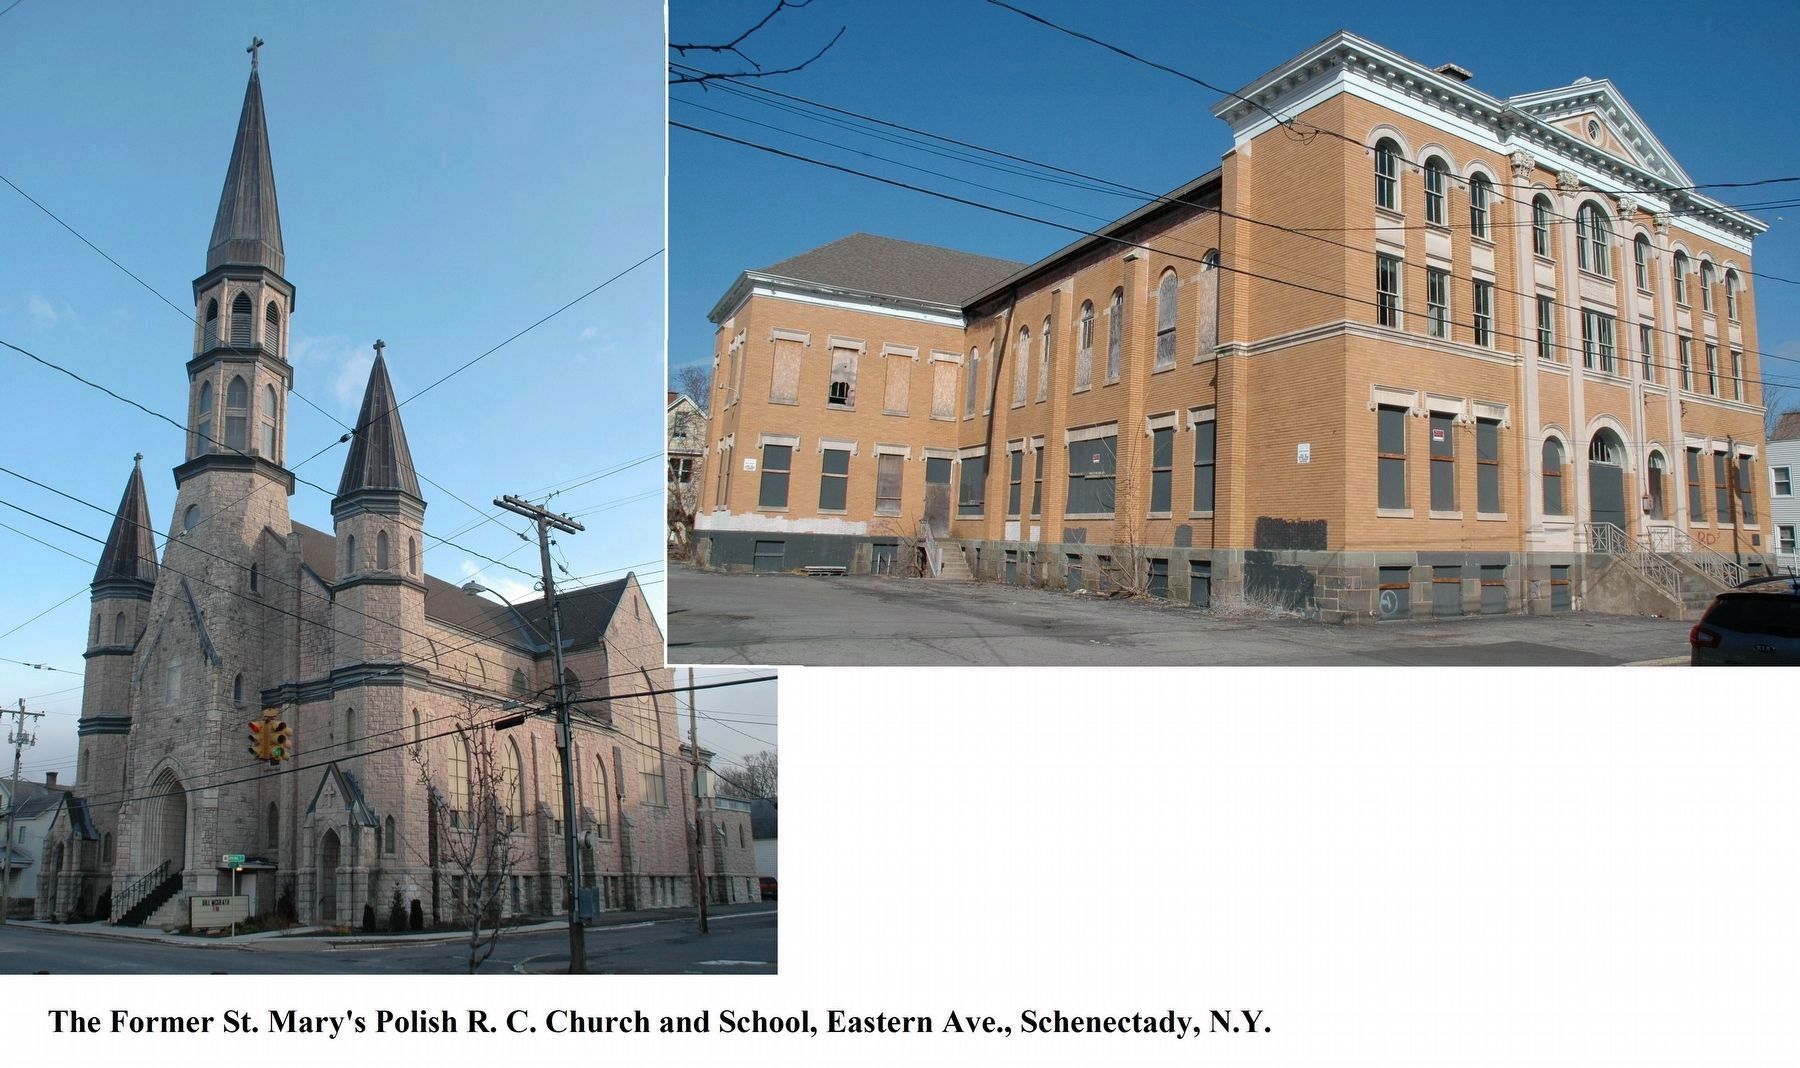 The Former St. Mary's Polish R. C. Church and School, Eastern Ave., Schenectady, N.Y. image. Click for full size.